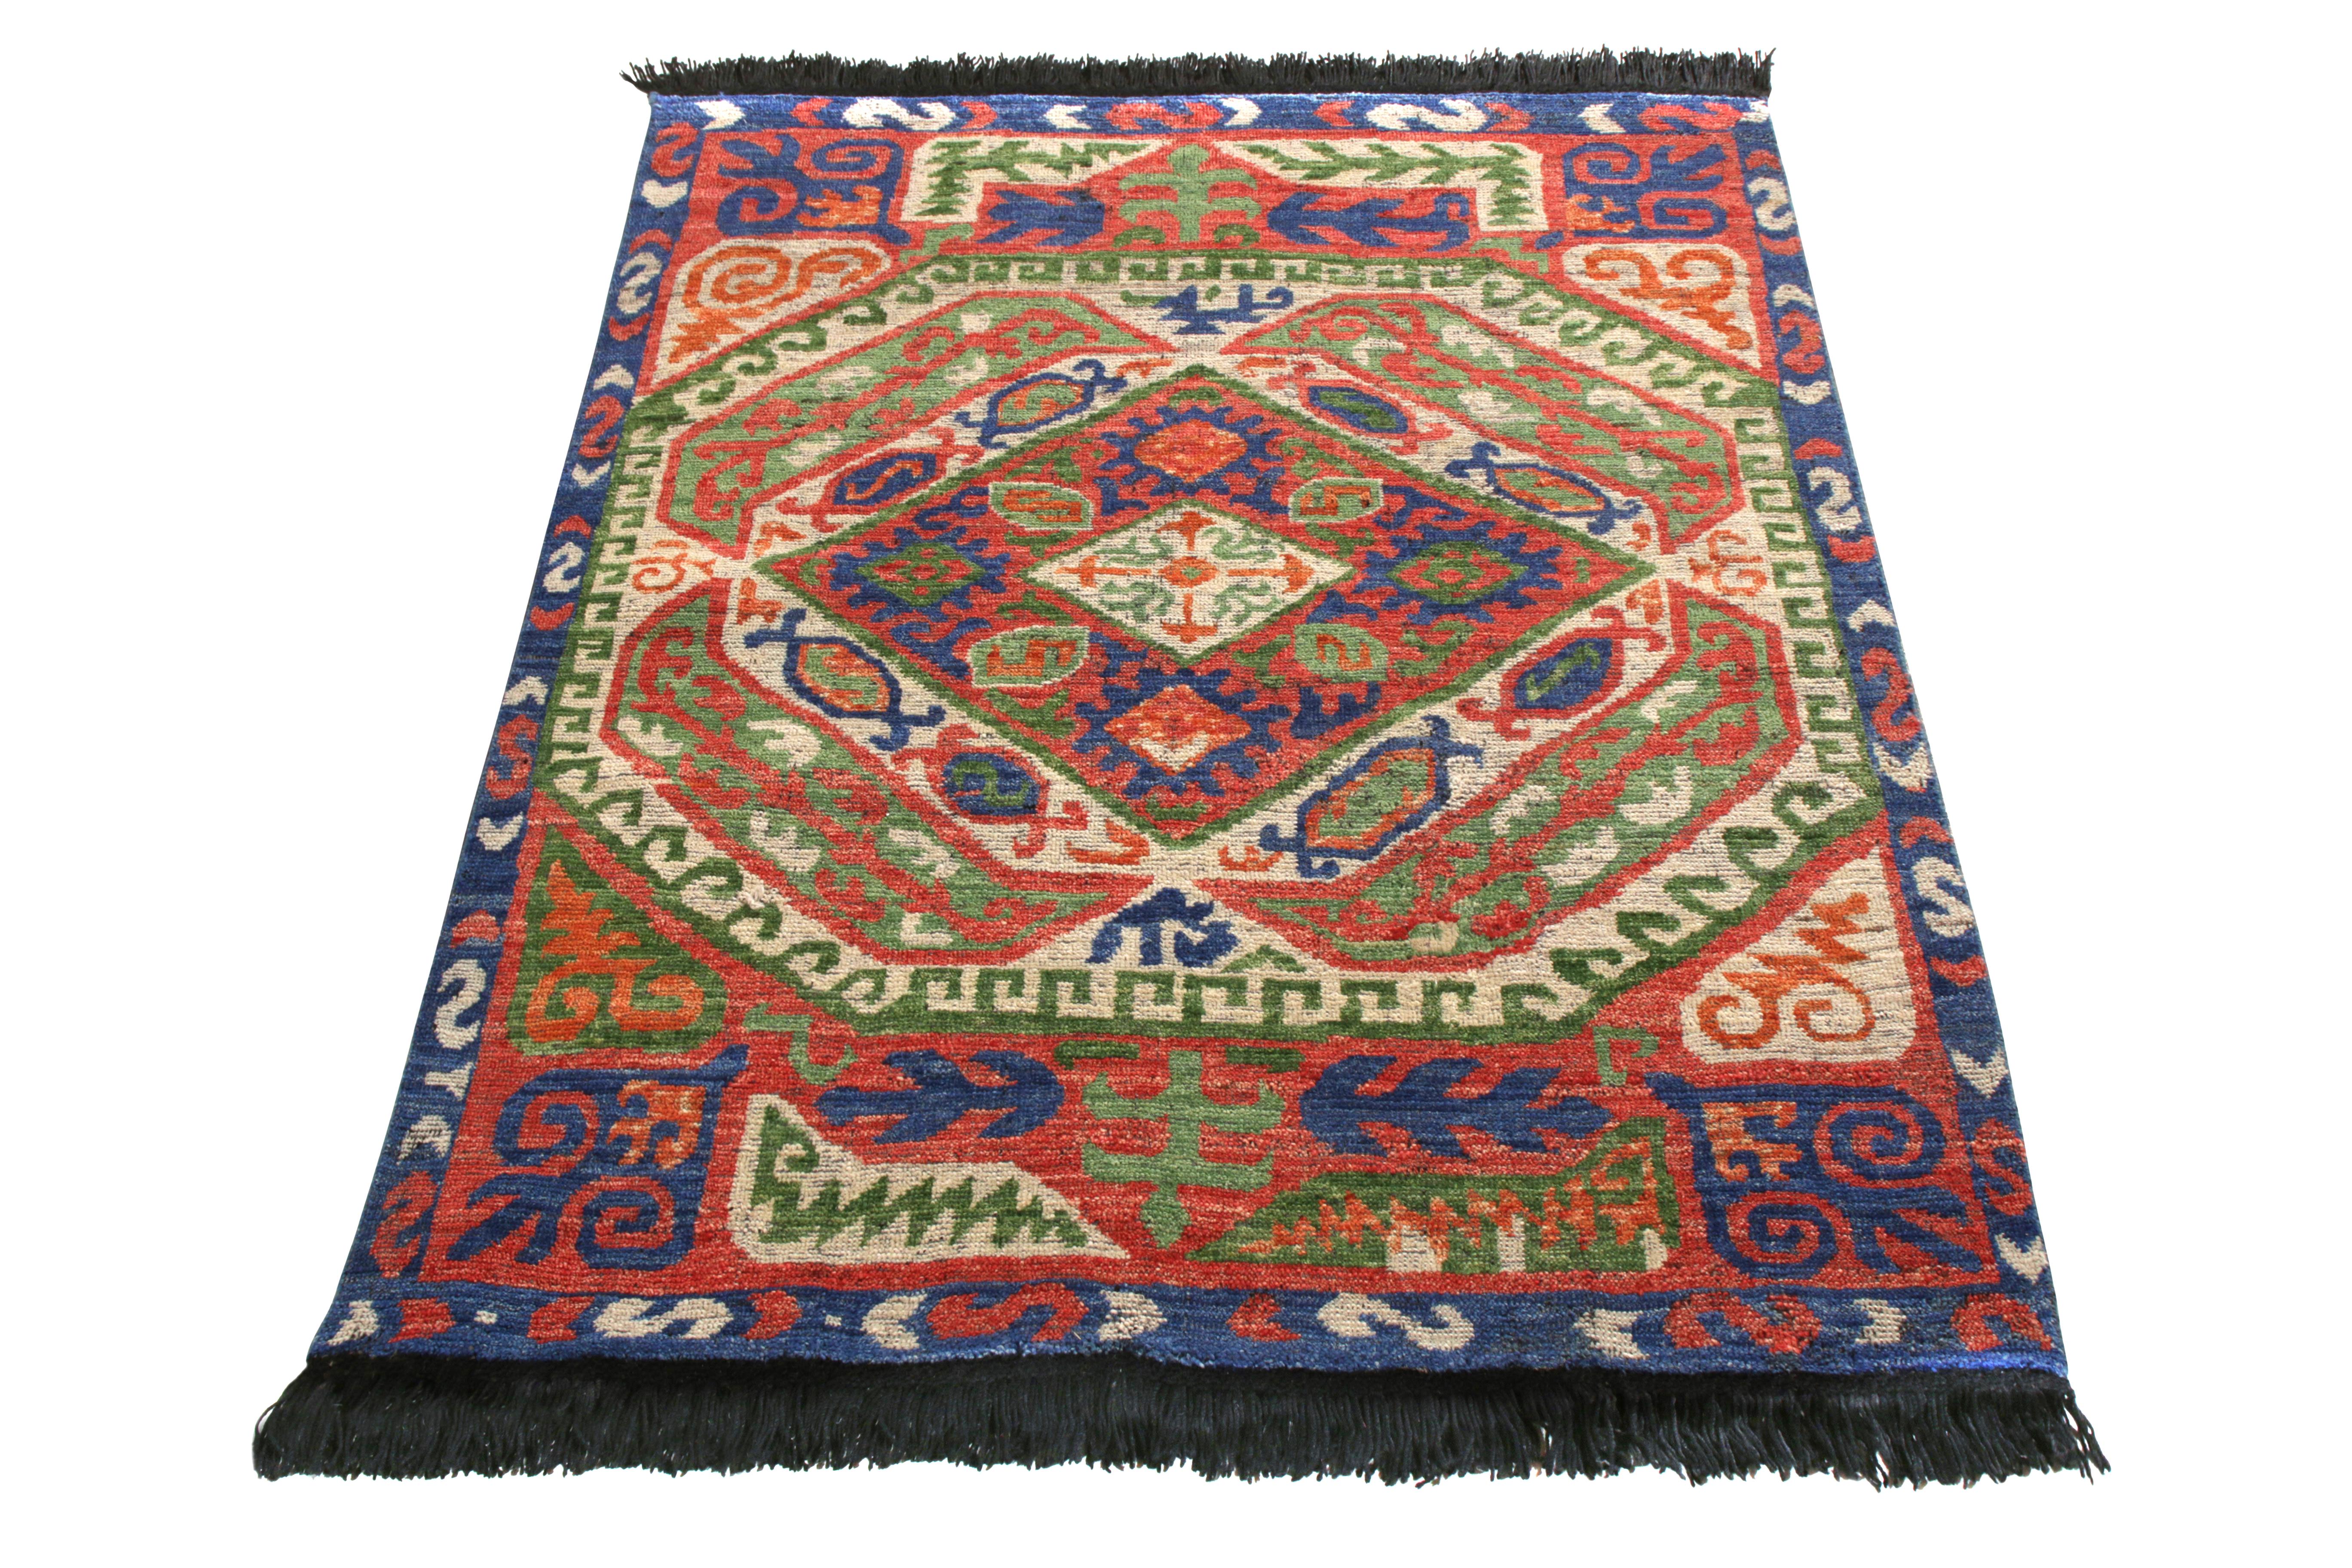 A 4x5 rug inspired by 18th century textiles of renown, from Rug & Kilim’s Burano Collection. Hand knotted in notable soft Ghazni wool, employing the most vibrant red, blue, and green atop white hues in this eclectic geometry. Enjoying a captivating